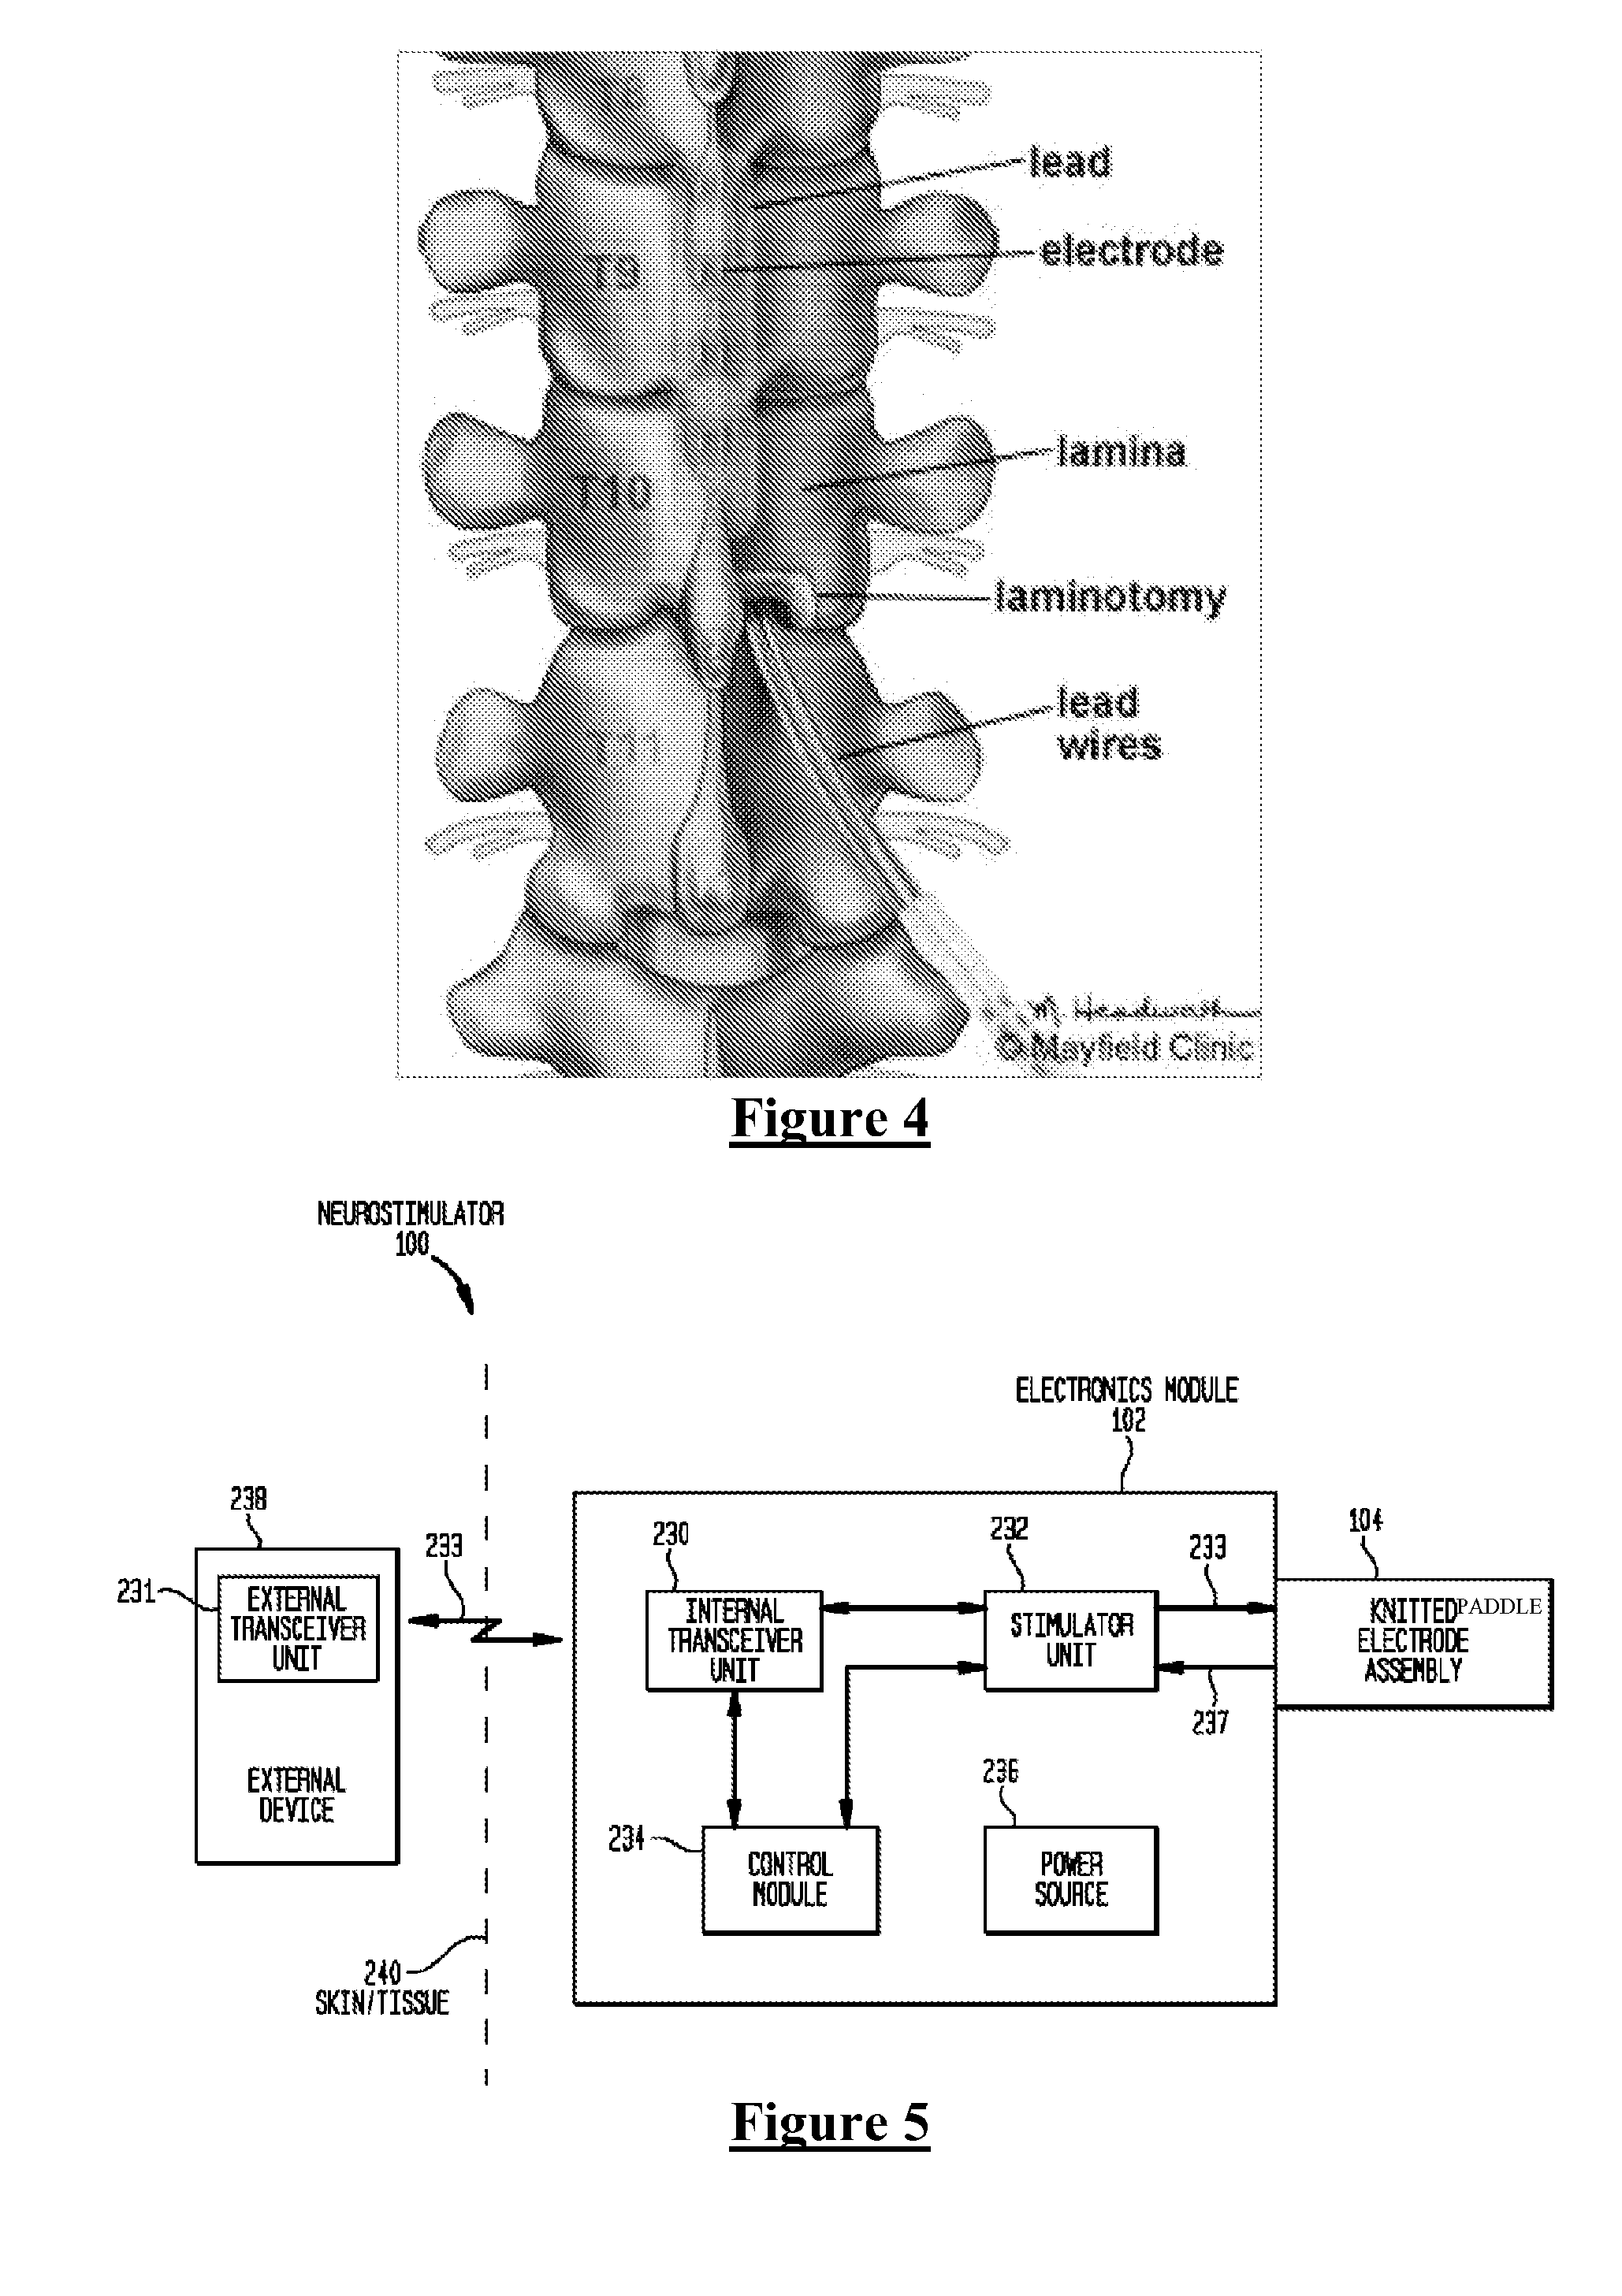 Electrode Assembly for an Active Implantable Medical Device